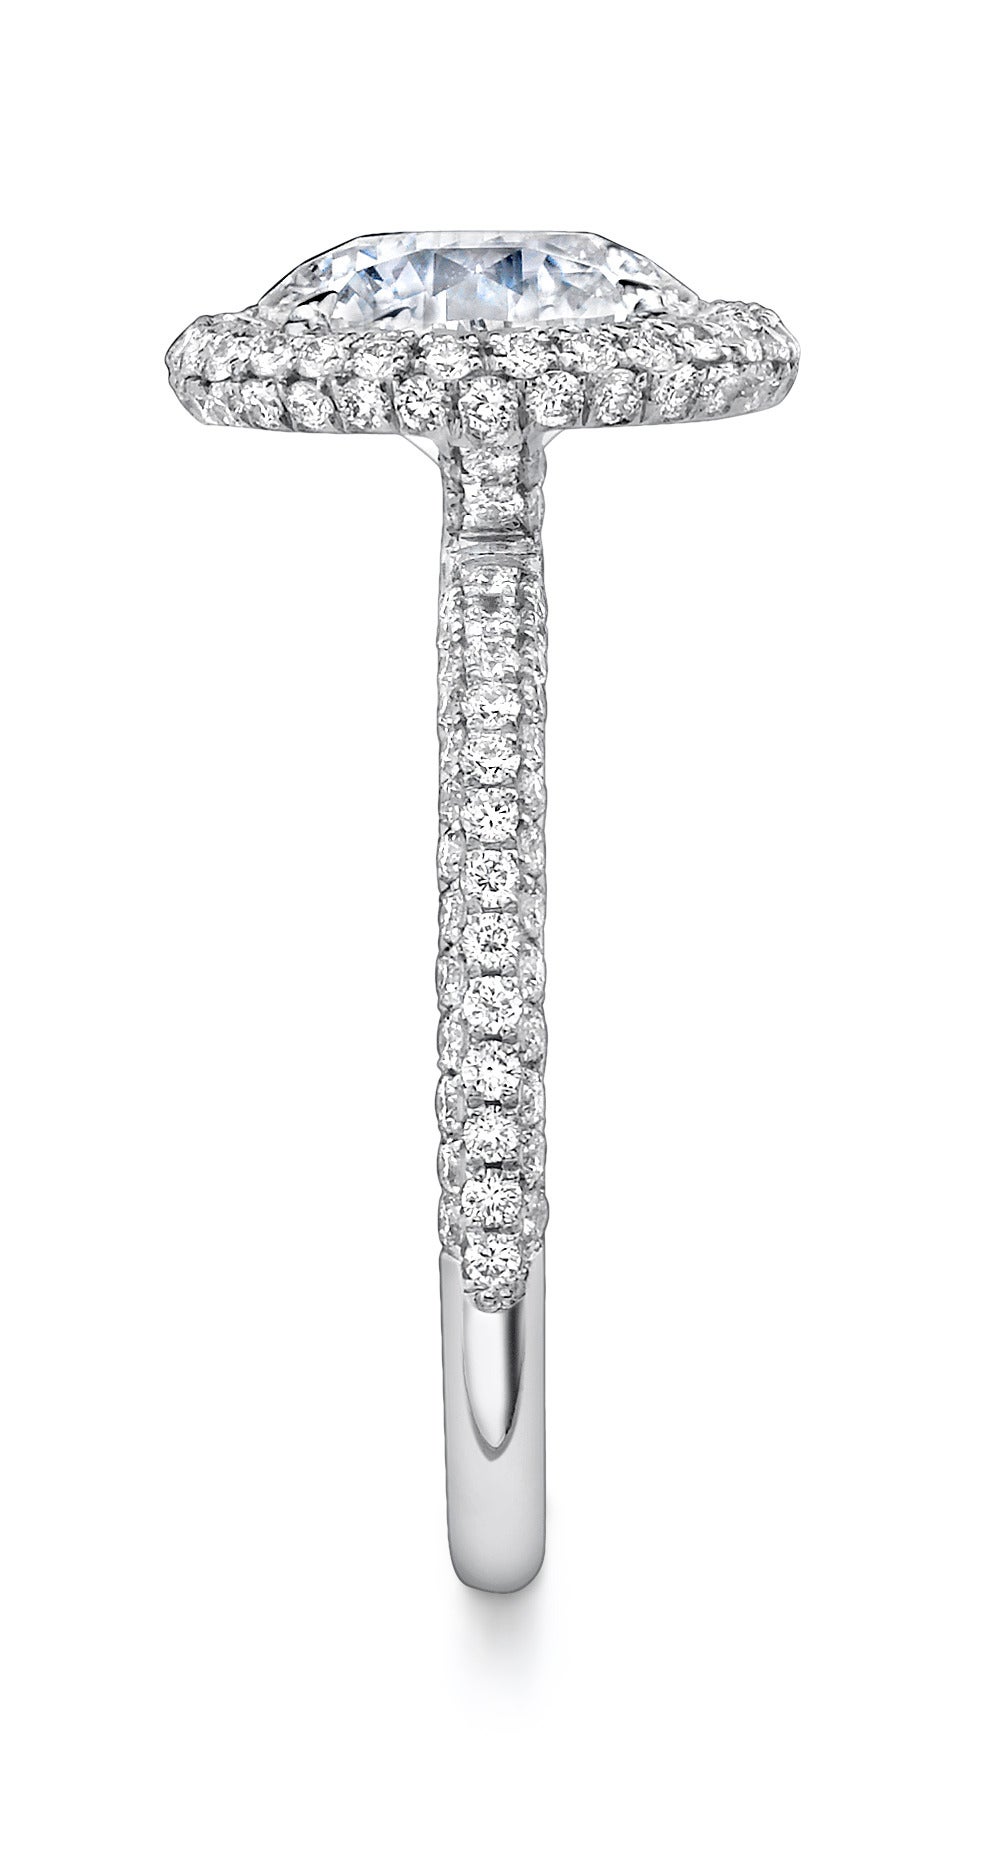 Platinum "Tri Halo" Ring with a Round Brilliant Center Stone Suspended by a Triple Row of Micro Pave Ideal Cut Diamonds.  Ideal Cut Diamond Qualtiy F/VS2 with a Total Weight of 1.07CT. 

Throughout history, the halo has symbolized